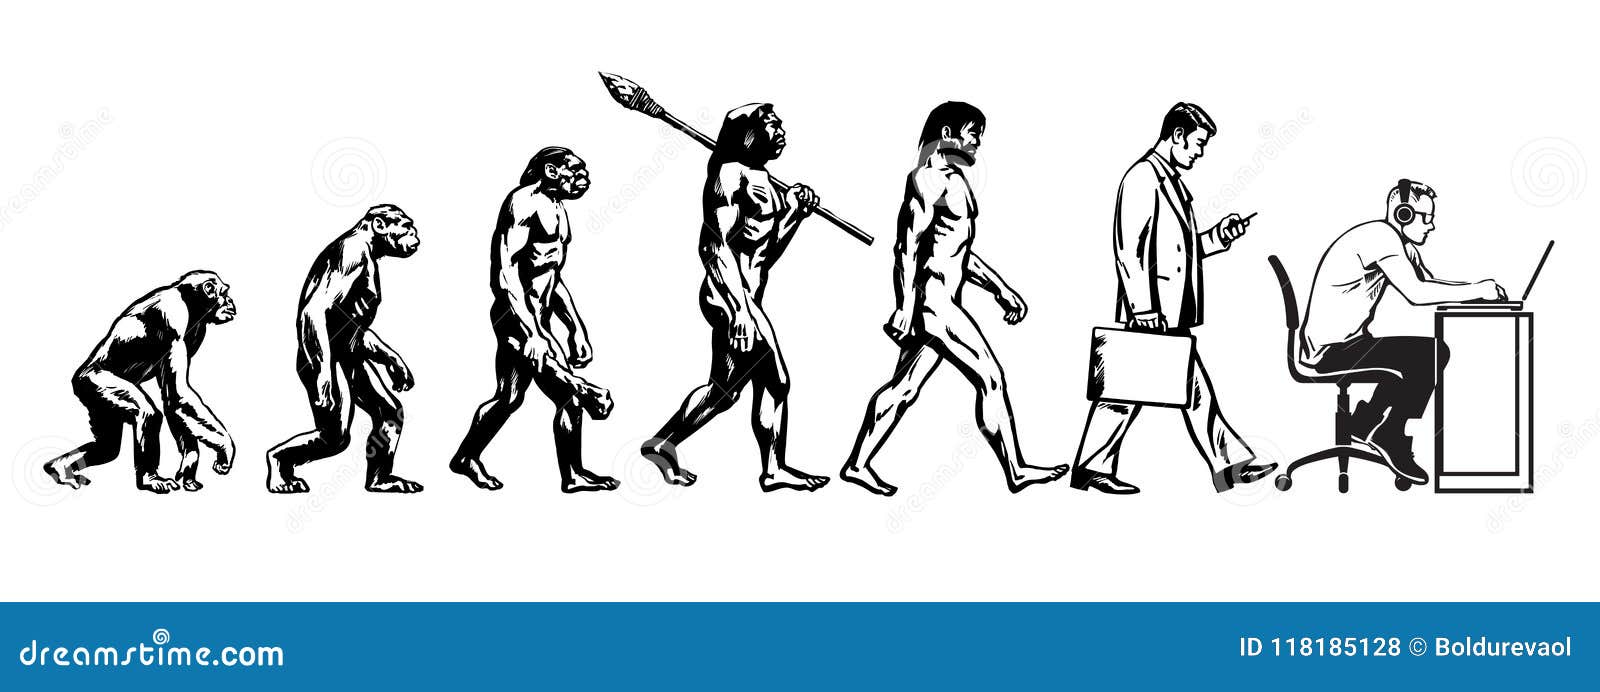 theory of evolution of man